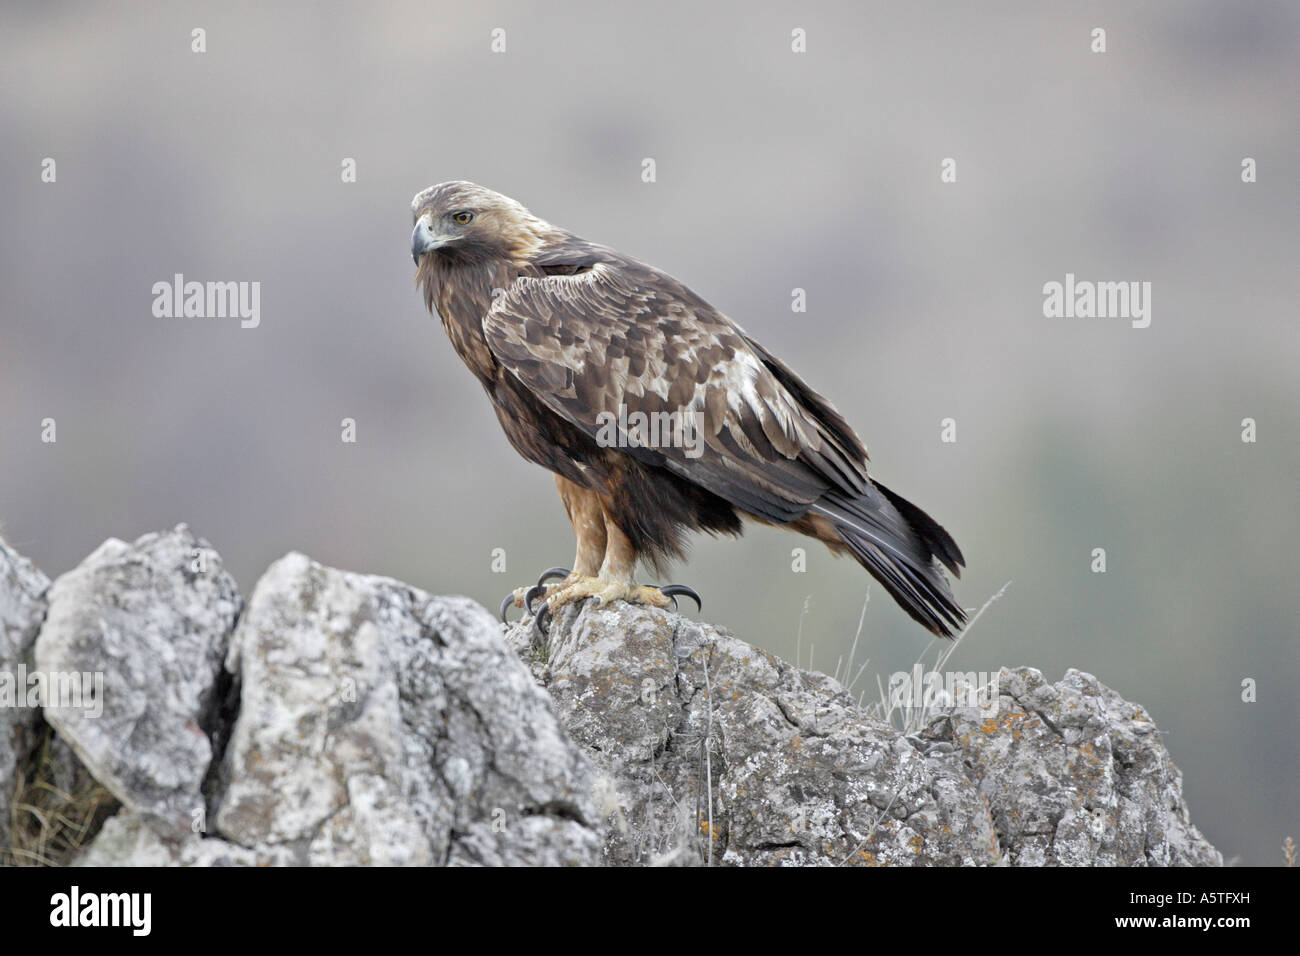 Adult Golden Eagle perching on rocks Stock Photo